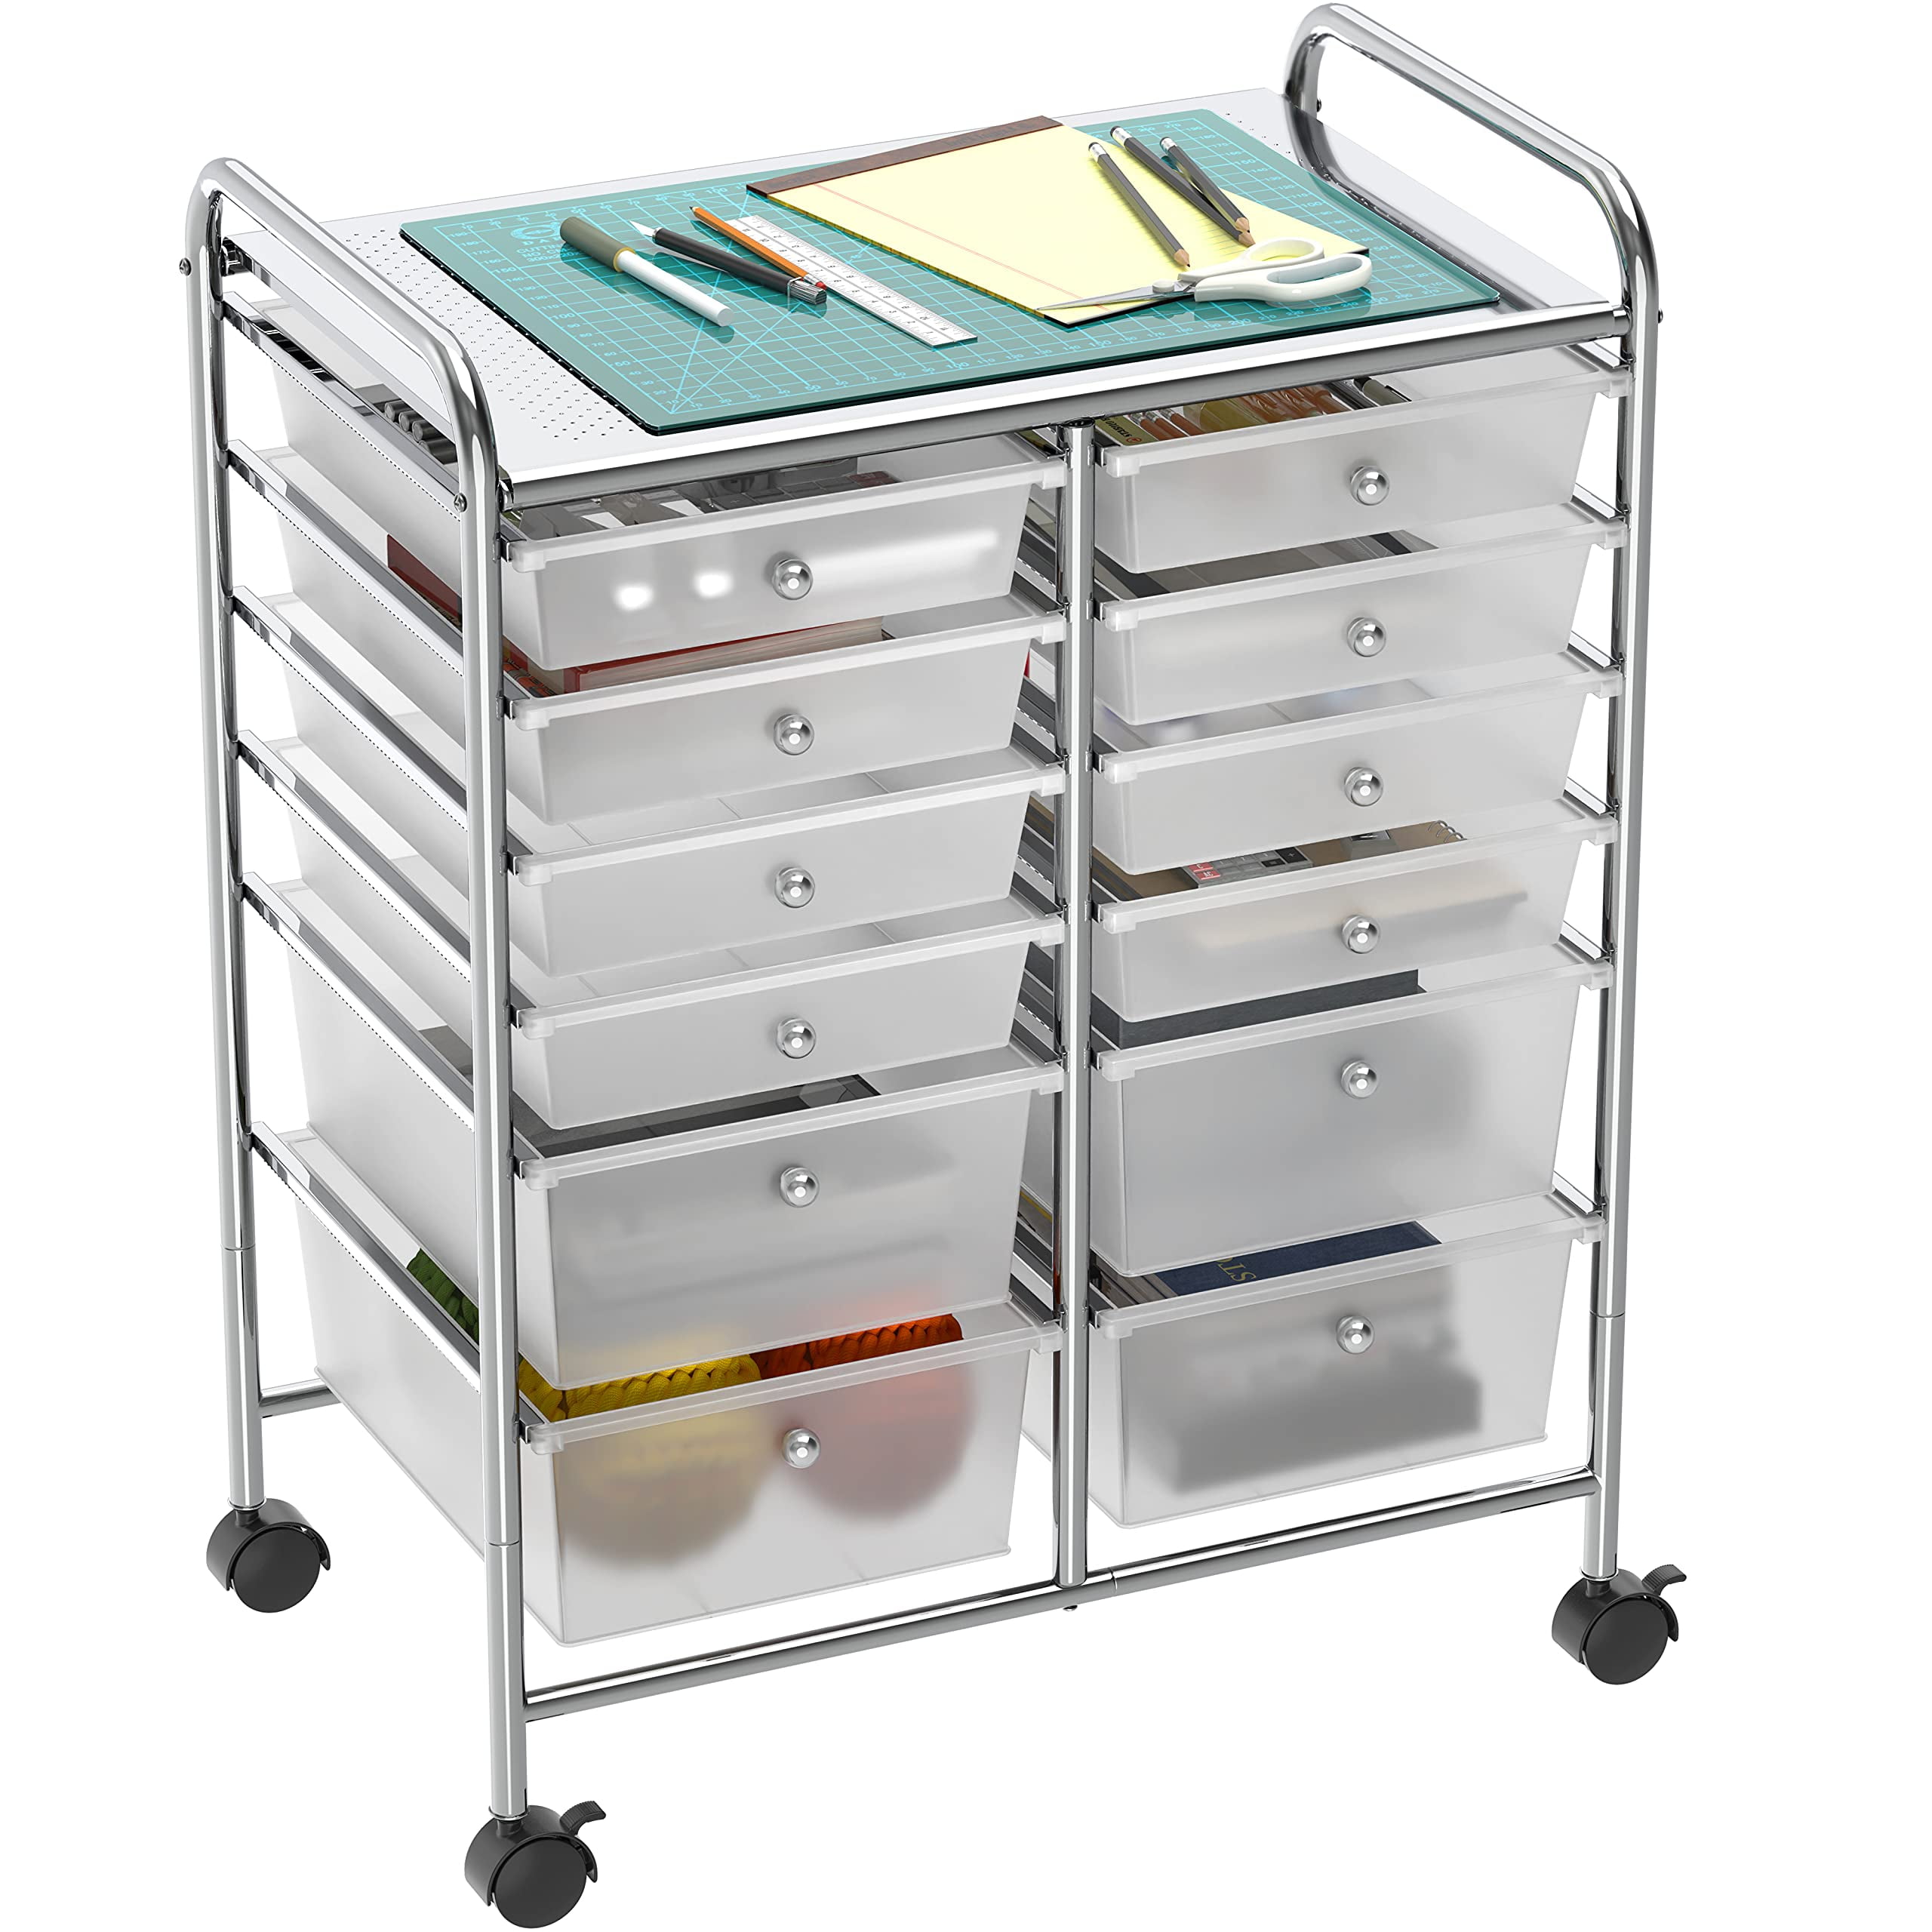 Simple Houseware Utility Cart with 12 Drawers Rolling Storage Art Craft Organizer on Wheels 